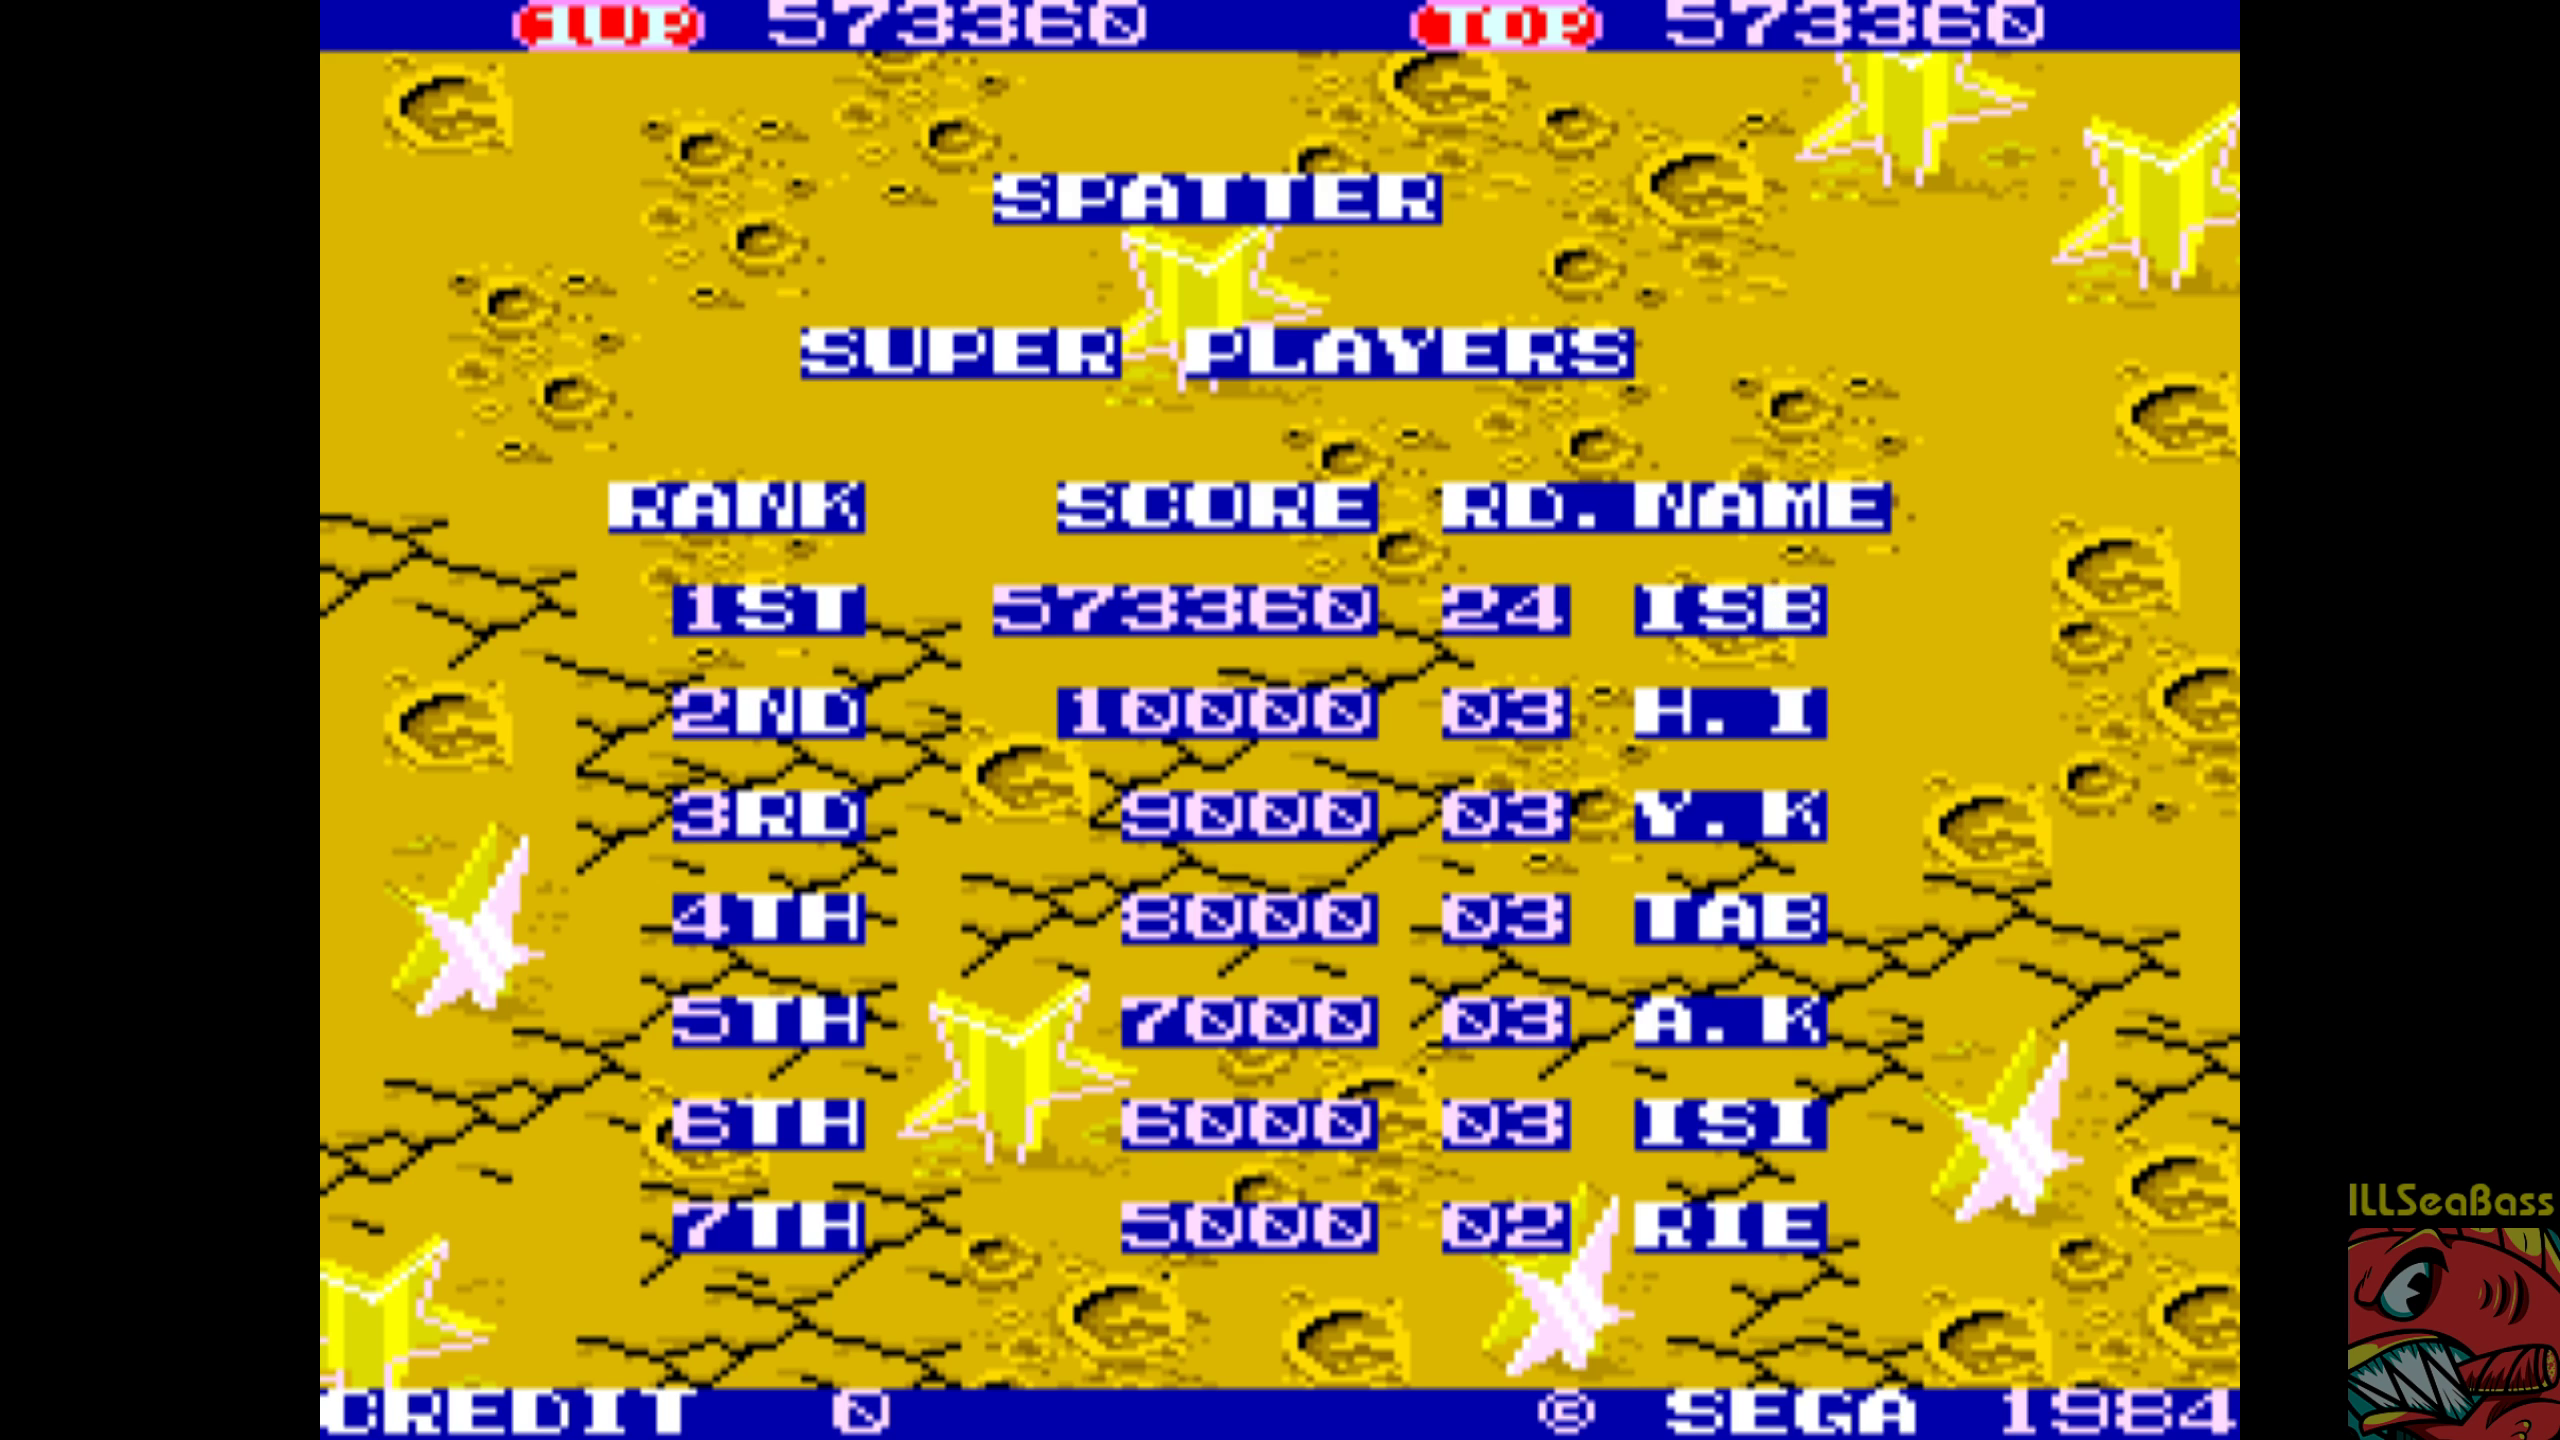 ILLSeaBass: Spatter [spatter] (Arcade Emulated / M.A.M.E.) 573,360 points on 2018-08-19 16:23:03